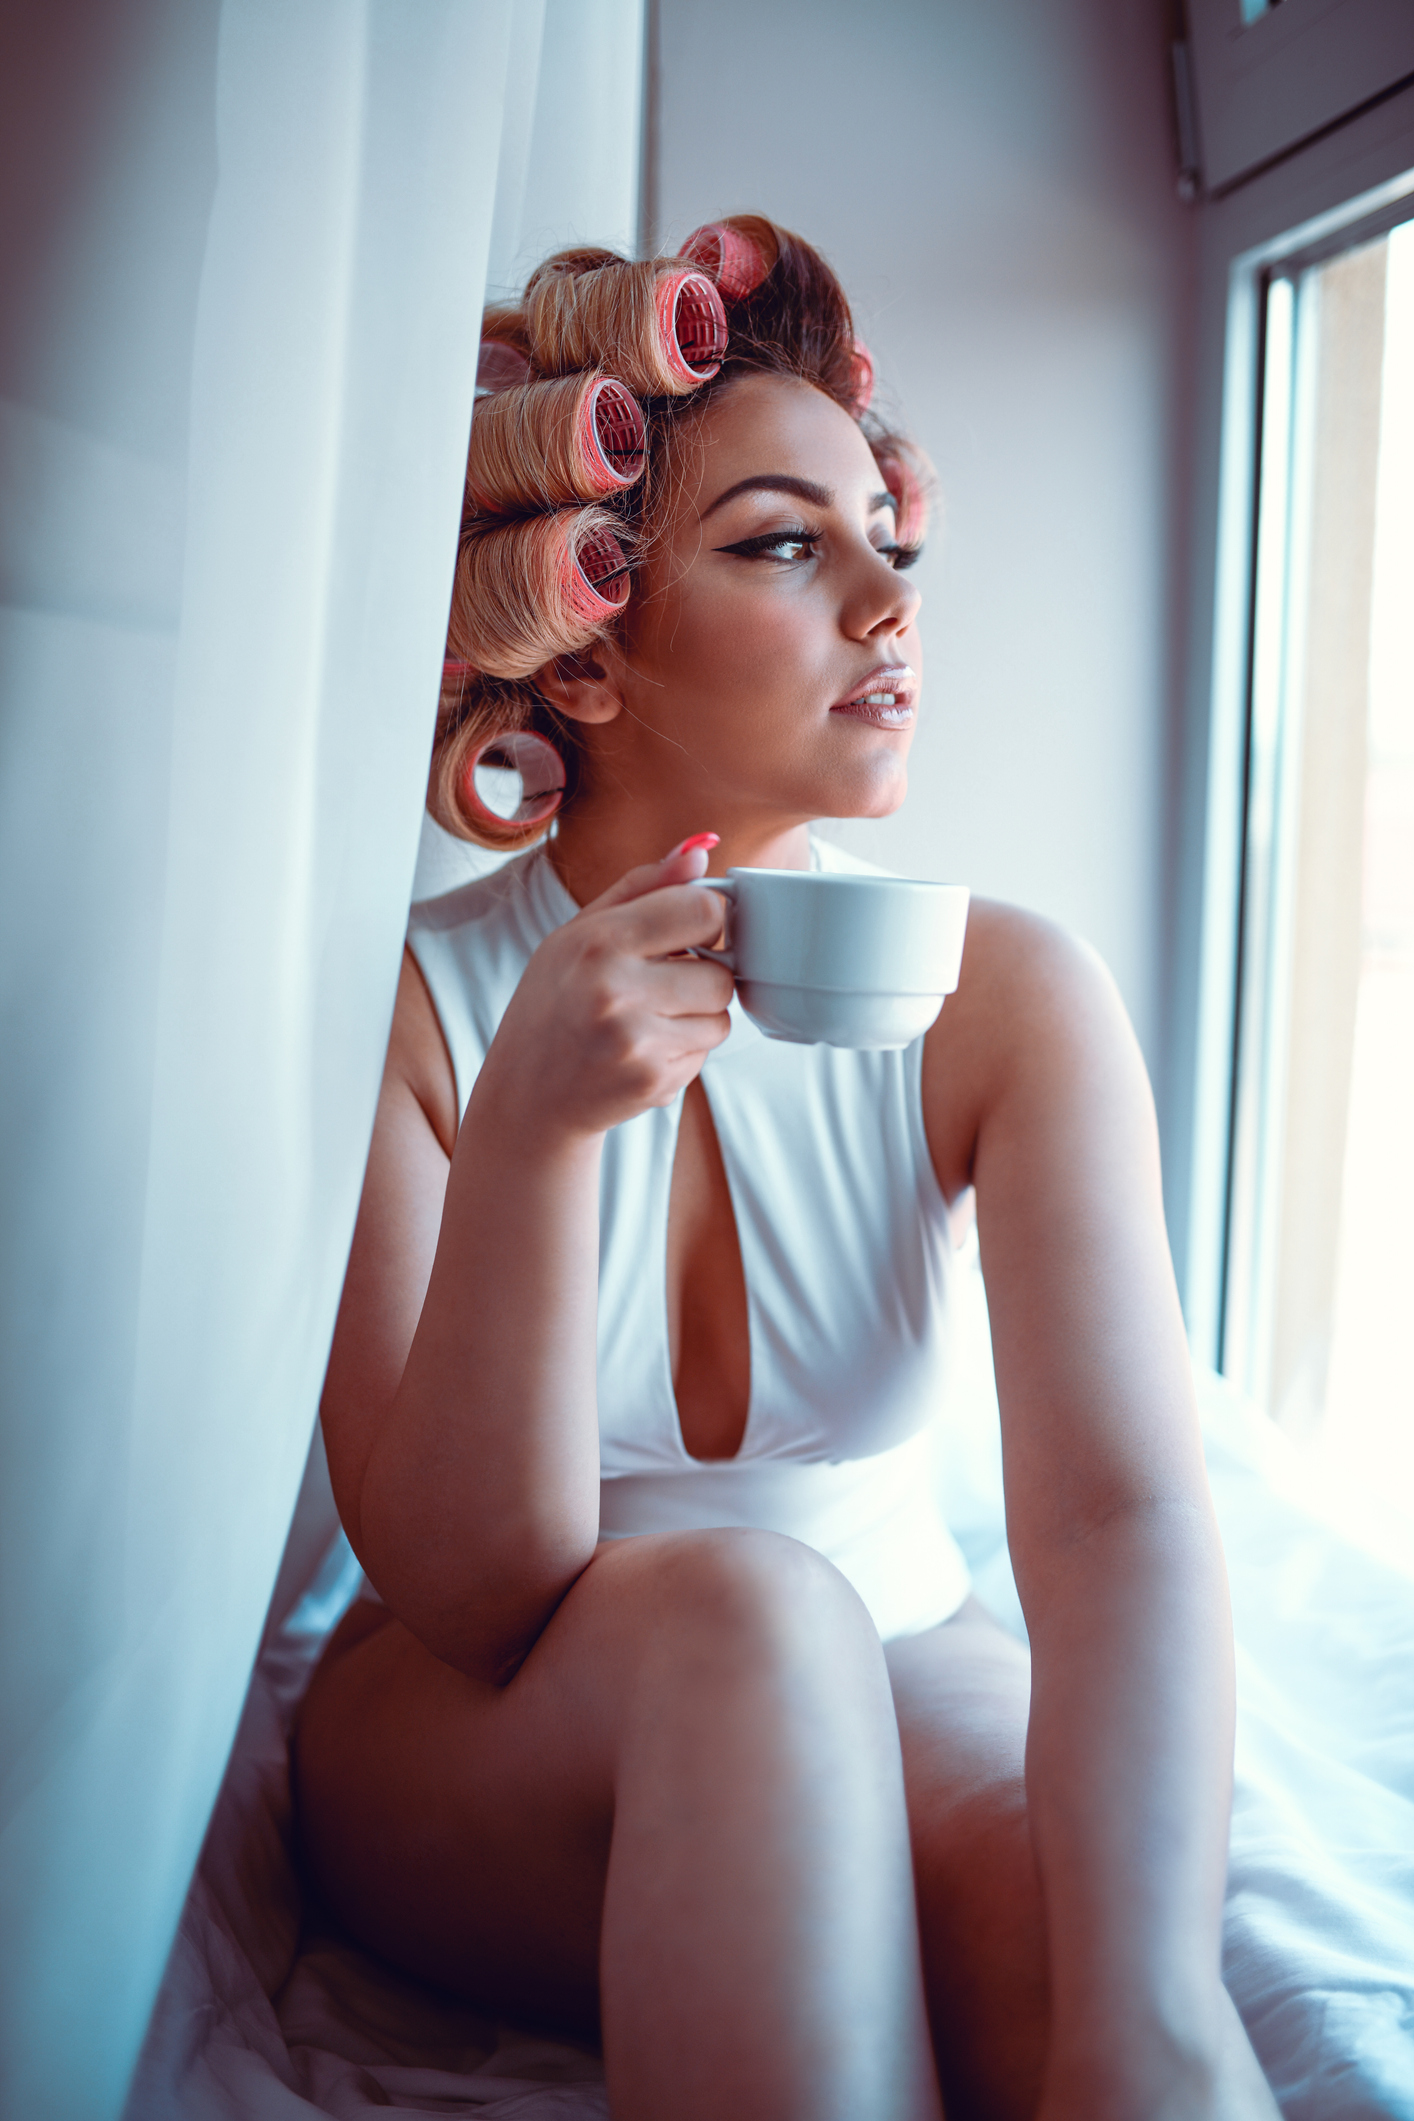 Cute Female With Hair Rolling Pins Drinking Coffee